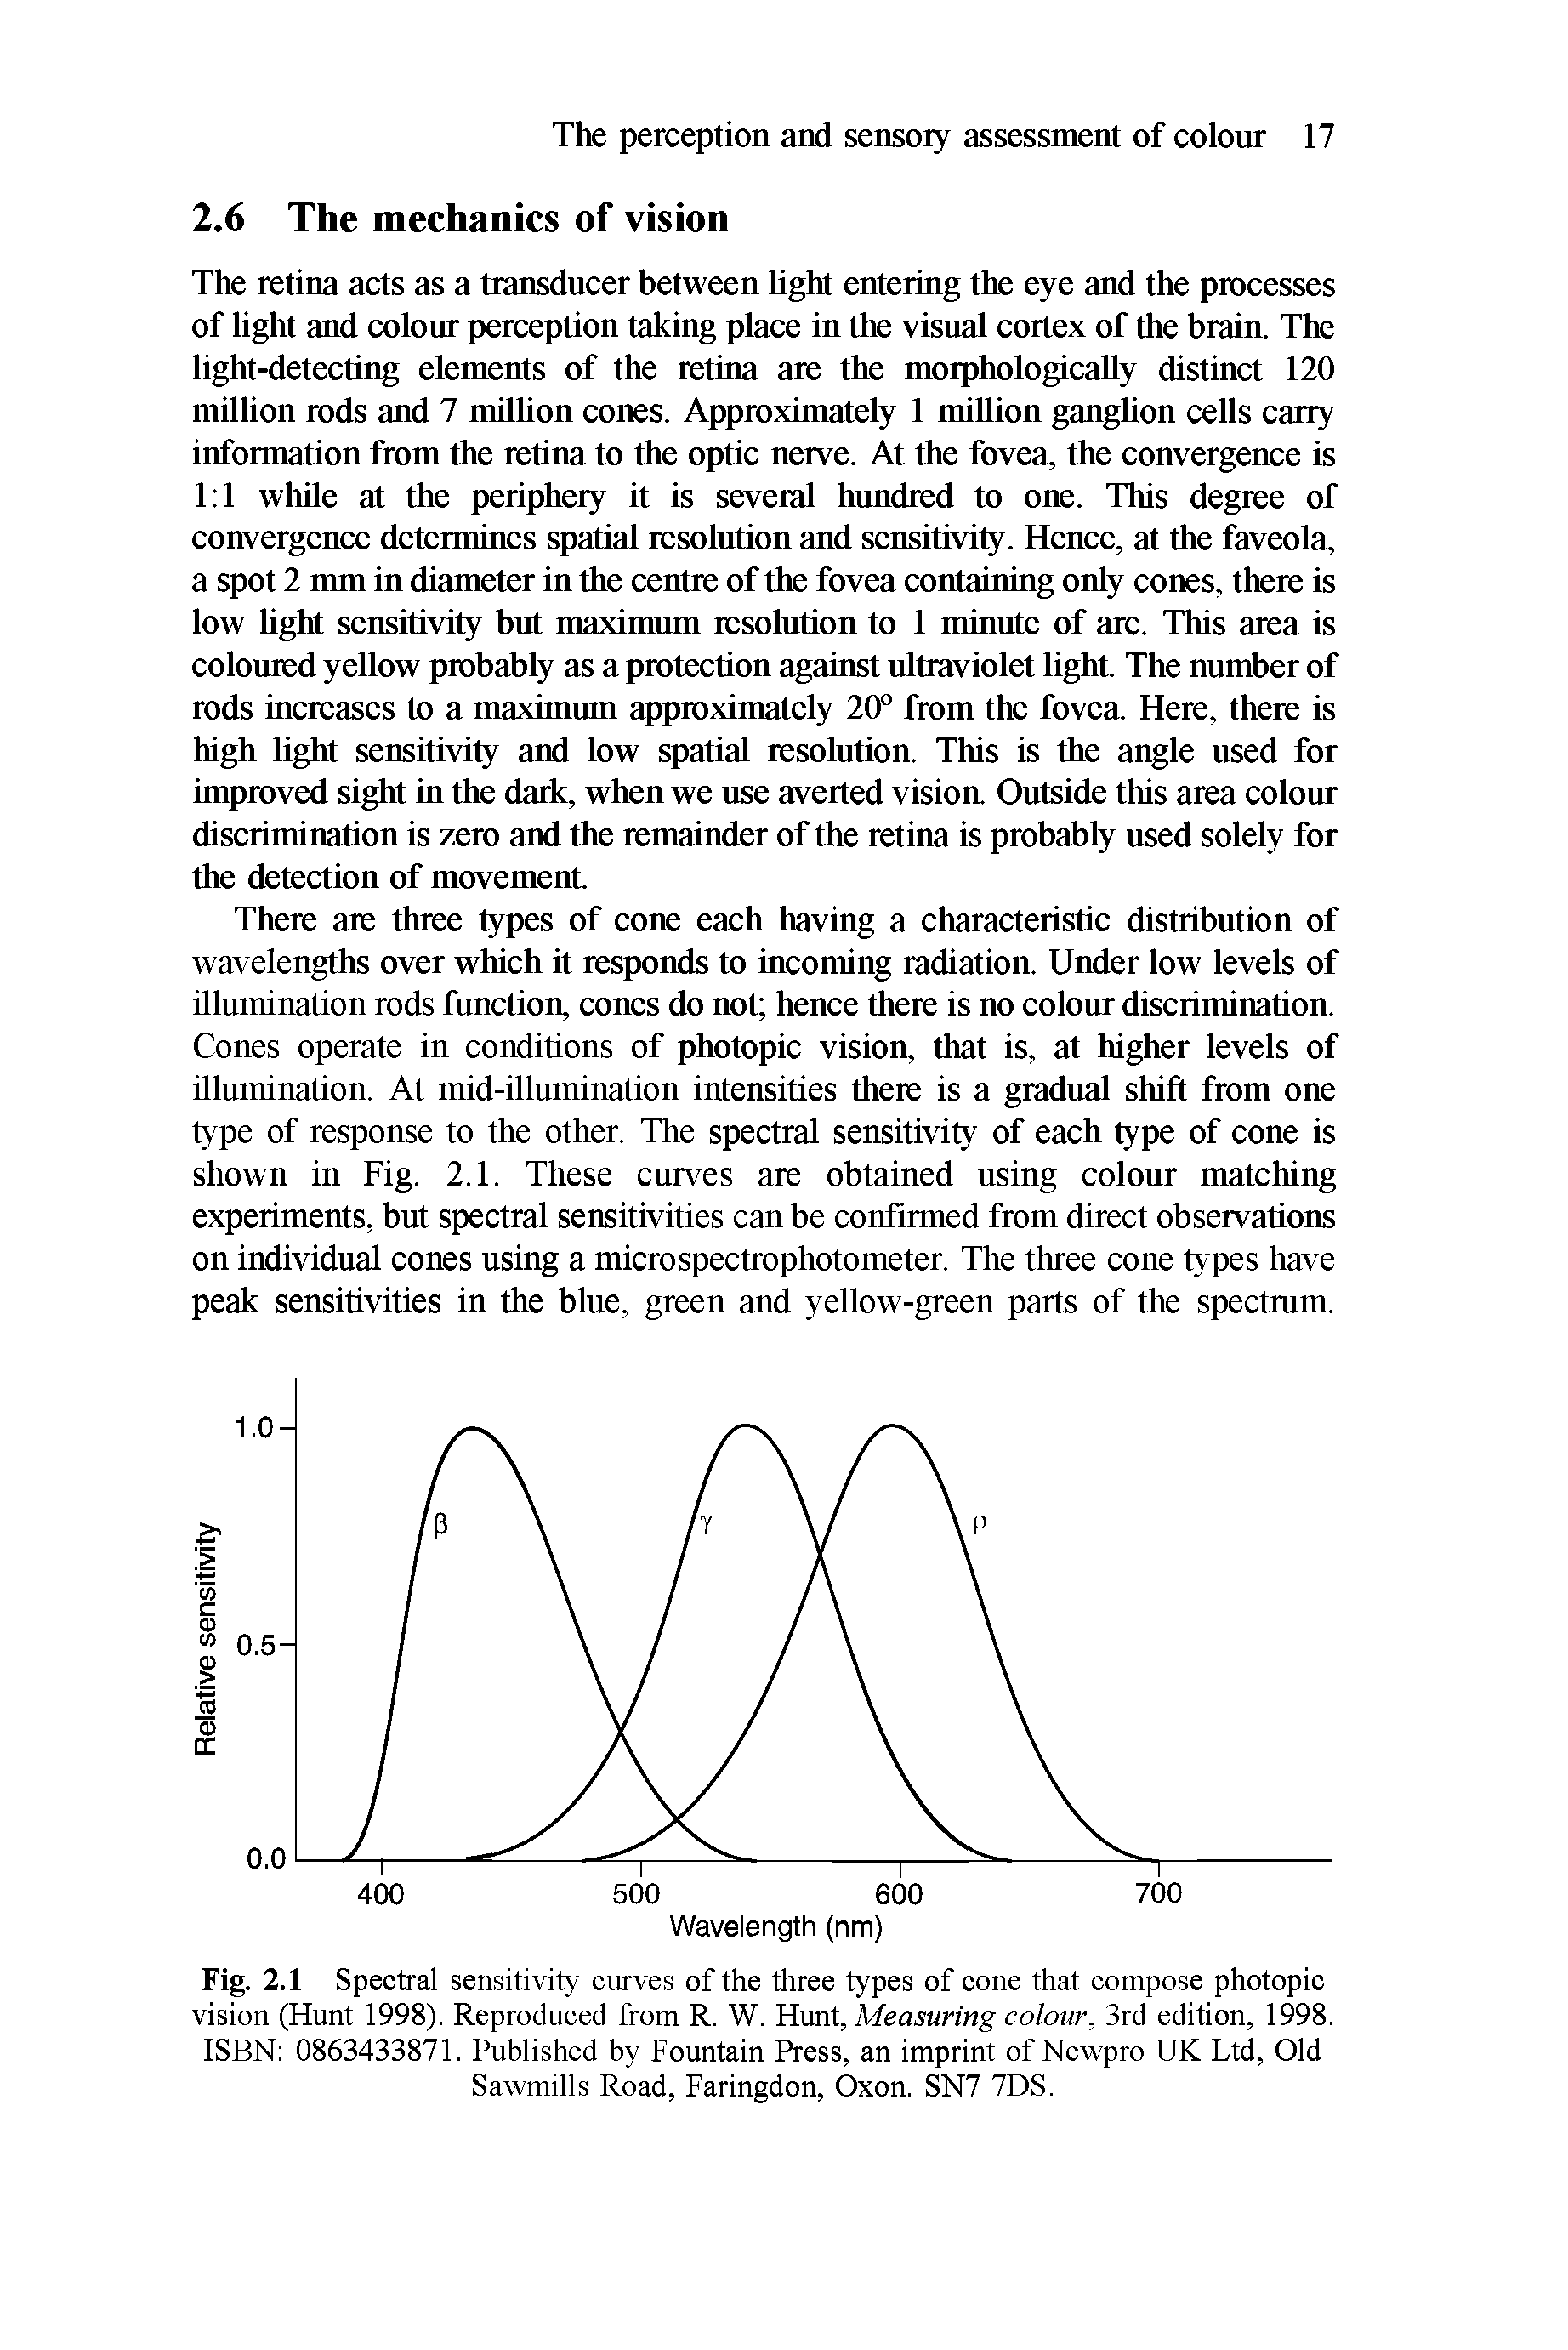 Fig. 2.1 Spectral sensitivity curves of the three types of cone that compose photopic vision (Hunt 1998). Reproduced from R. W. Hunt, Measuring colour, 3rd edition, 1998. ISBN 0863433871. Published by Fountain Press, an imprint of Newpro UK Ltd, Old Sawmills Road, Faringdon, Oxon. SN7 7DS.